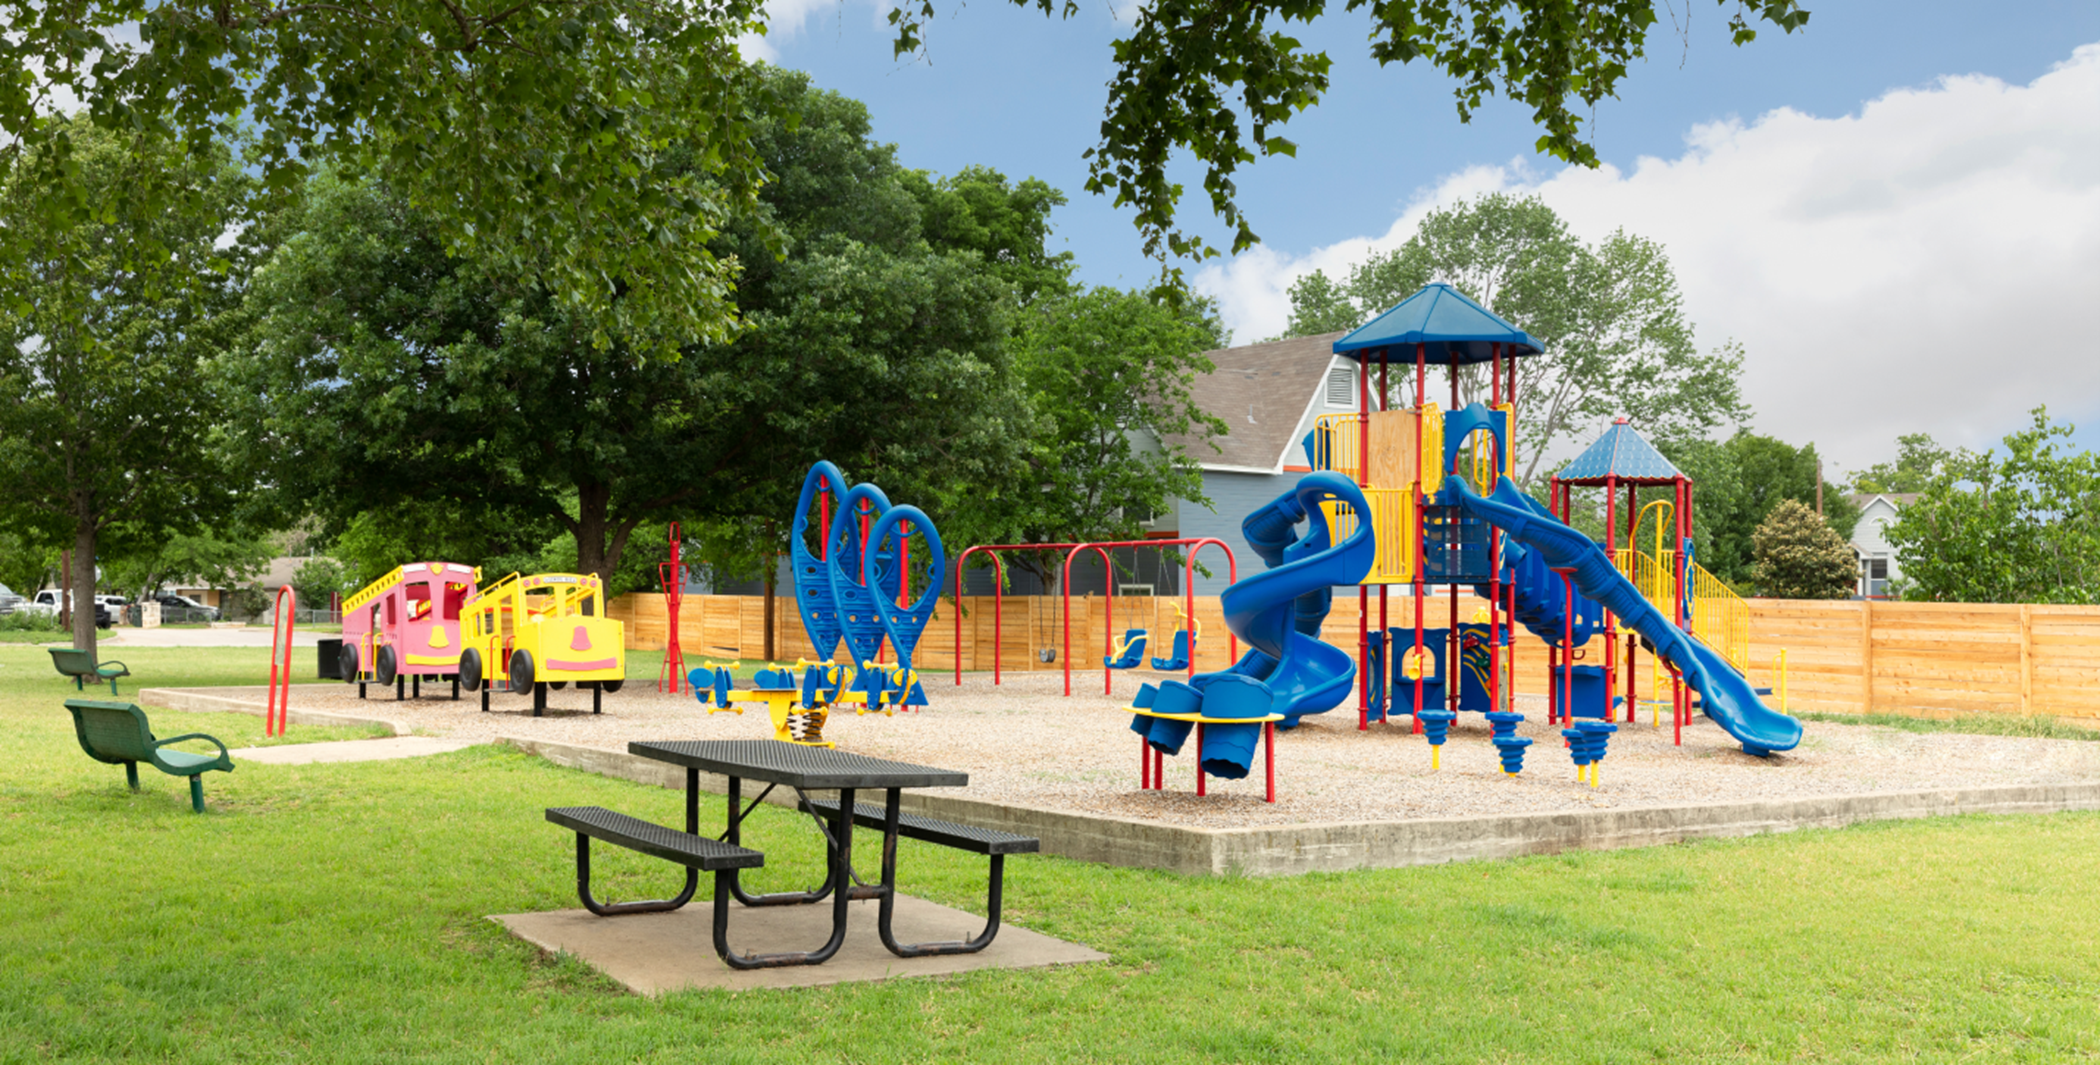 Local parks and playgrounds